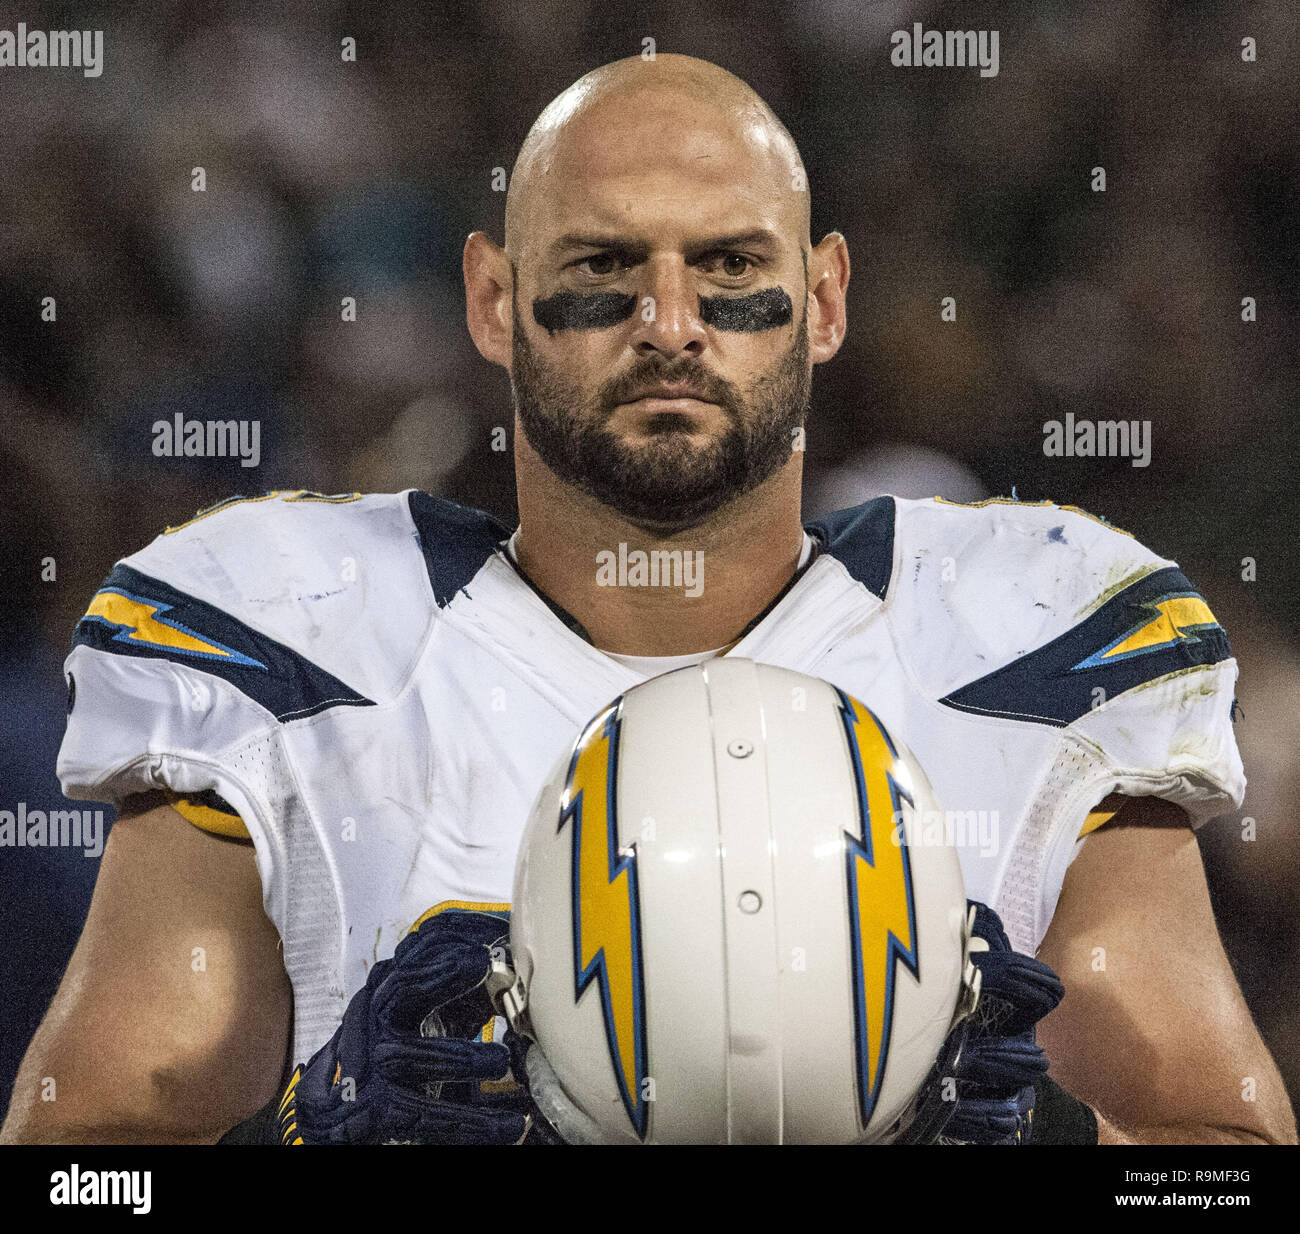 Oakland Raiders vs. San Diego Chargers, photo gallery